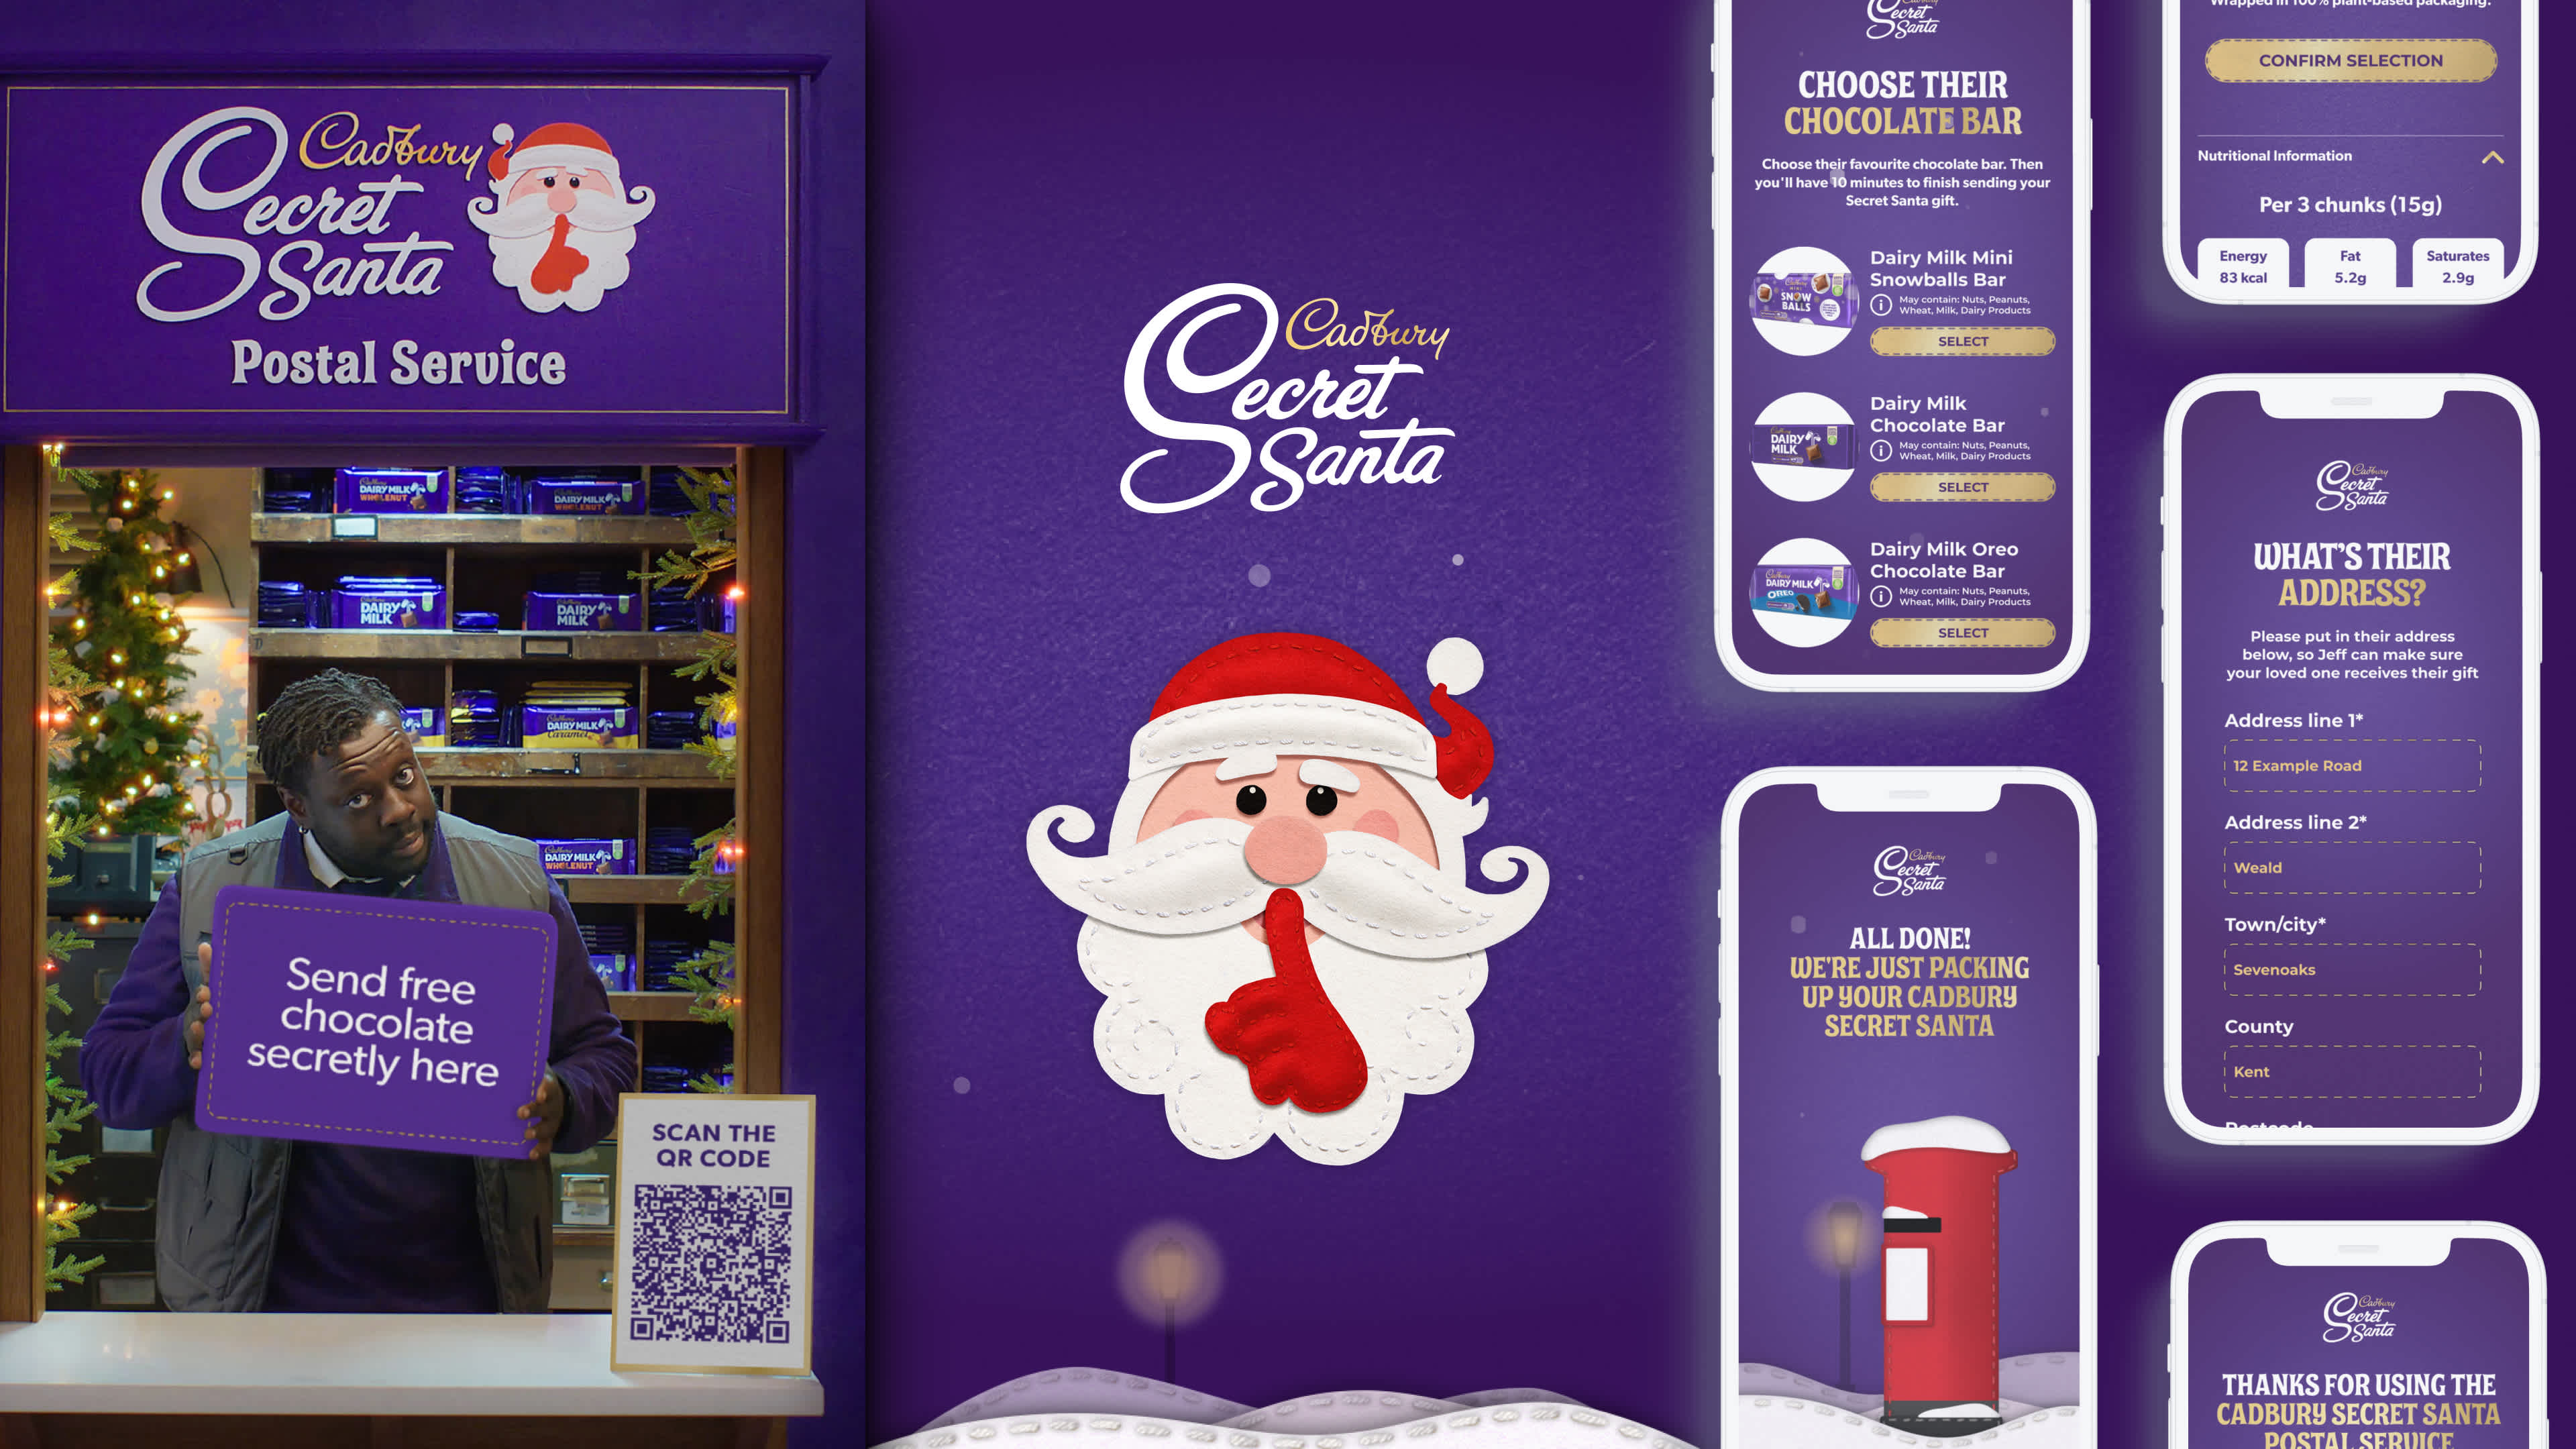 Image depicting a Cadbury Secret Santa campaign with a showcase of the application featuring interactive features.